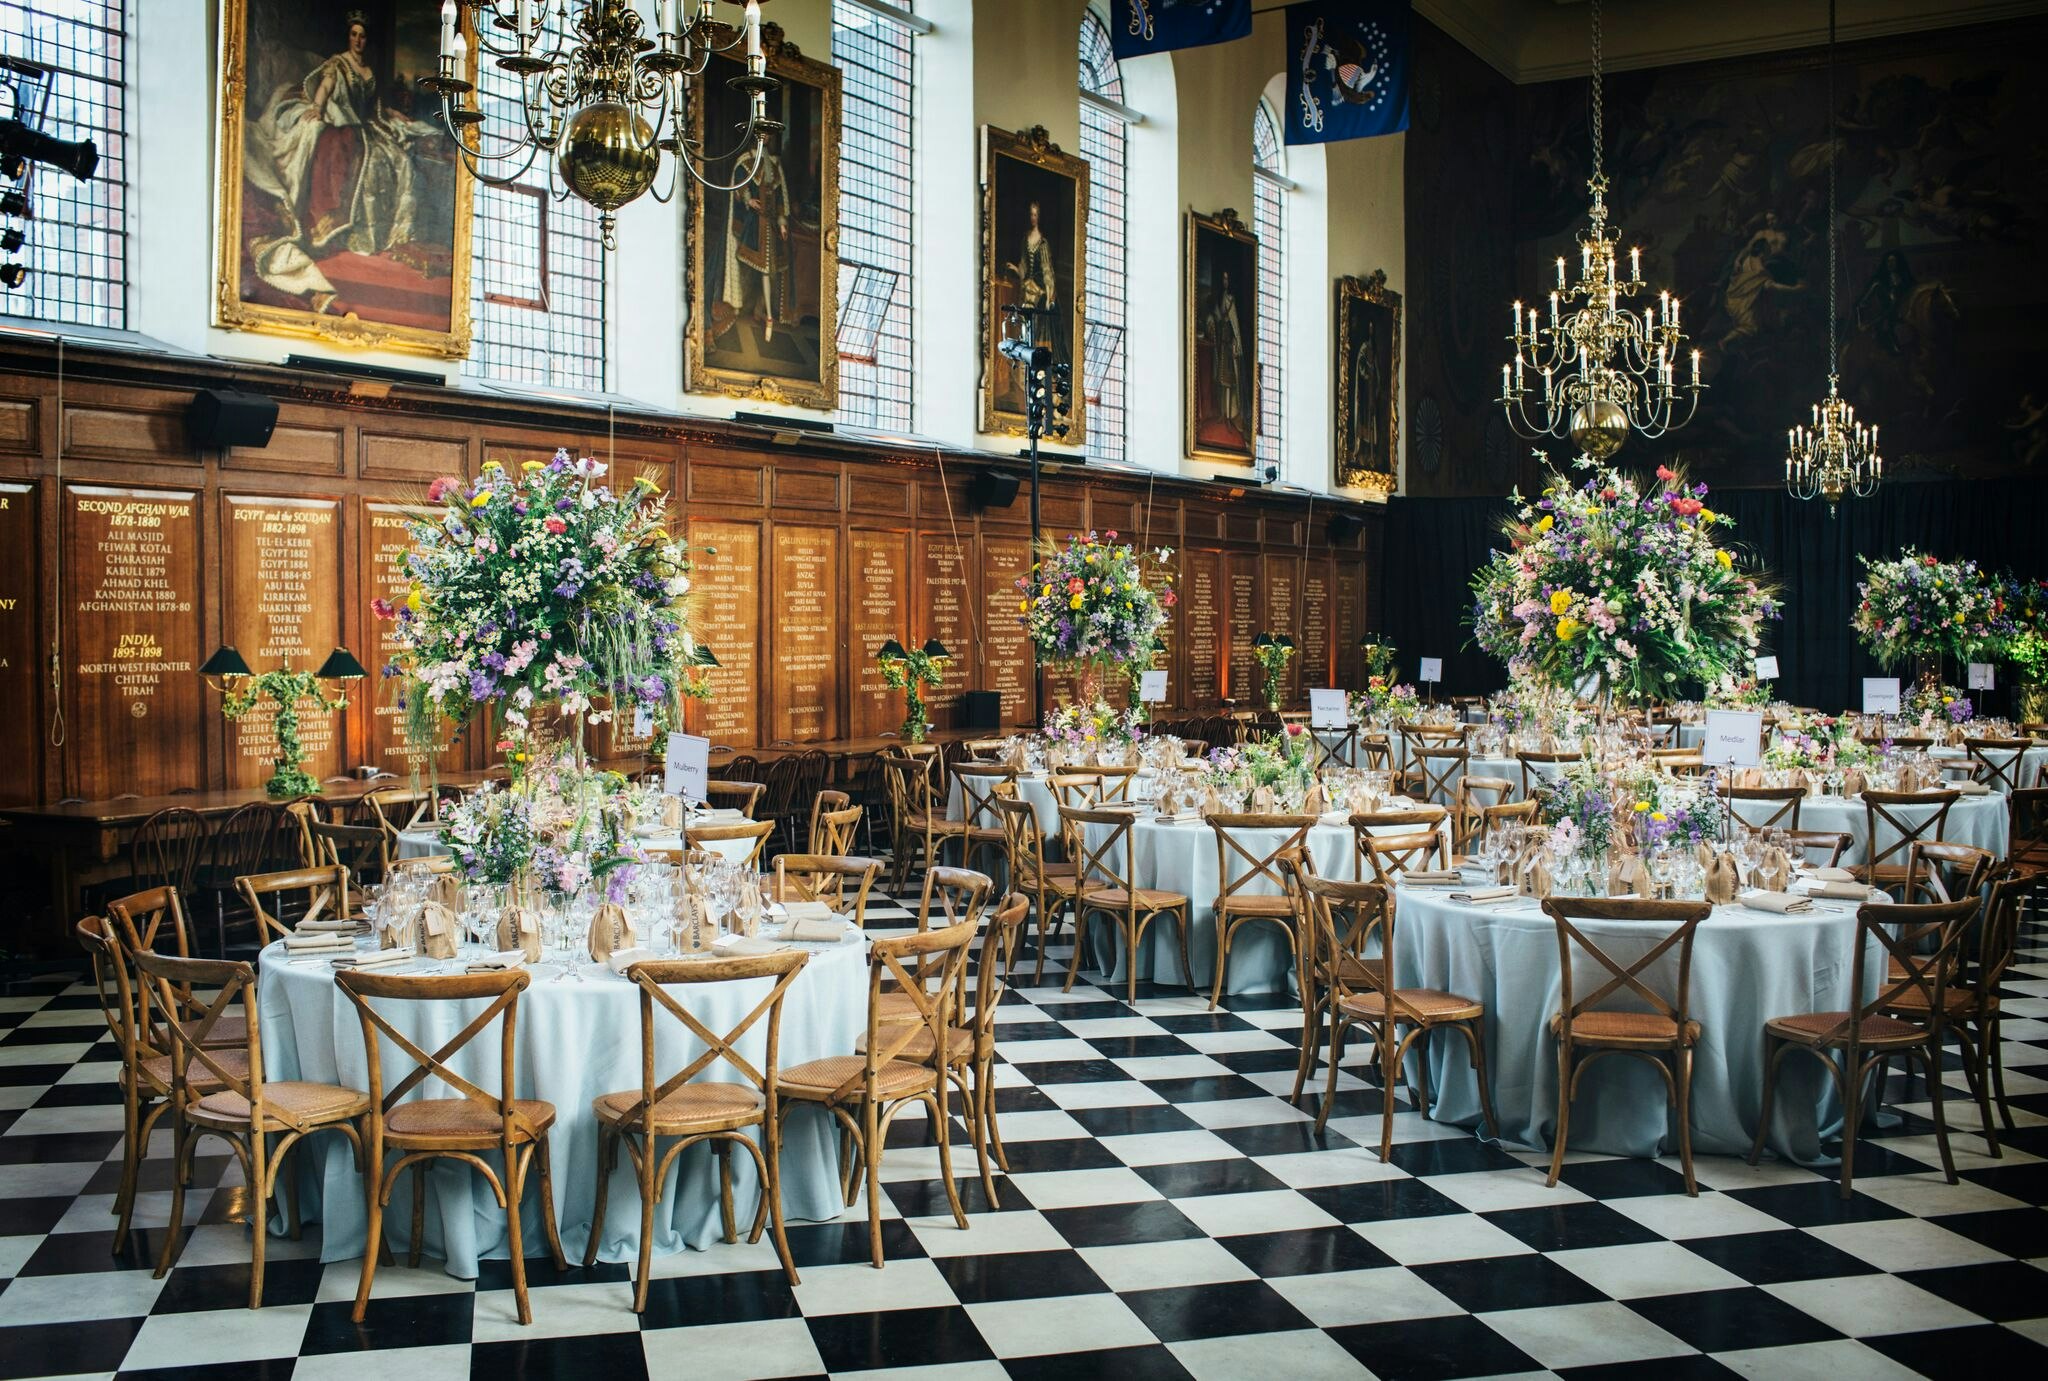 Events | The Great Hall